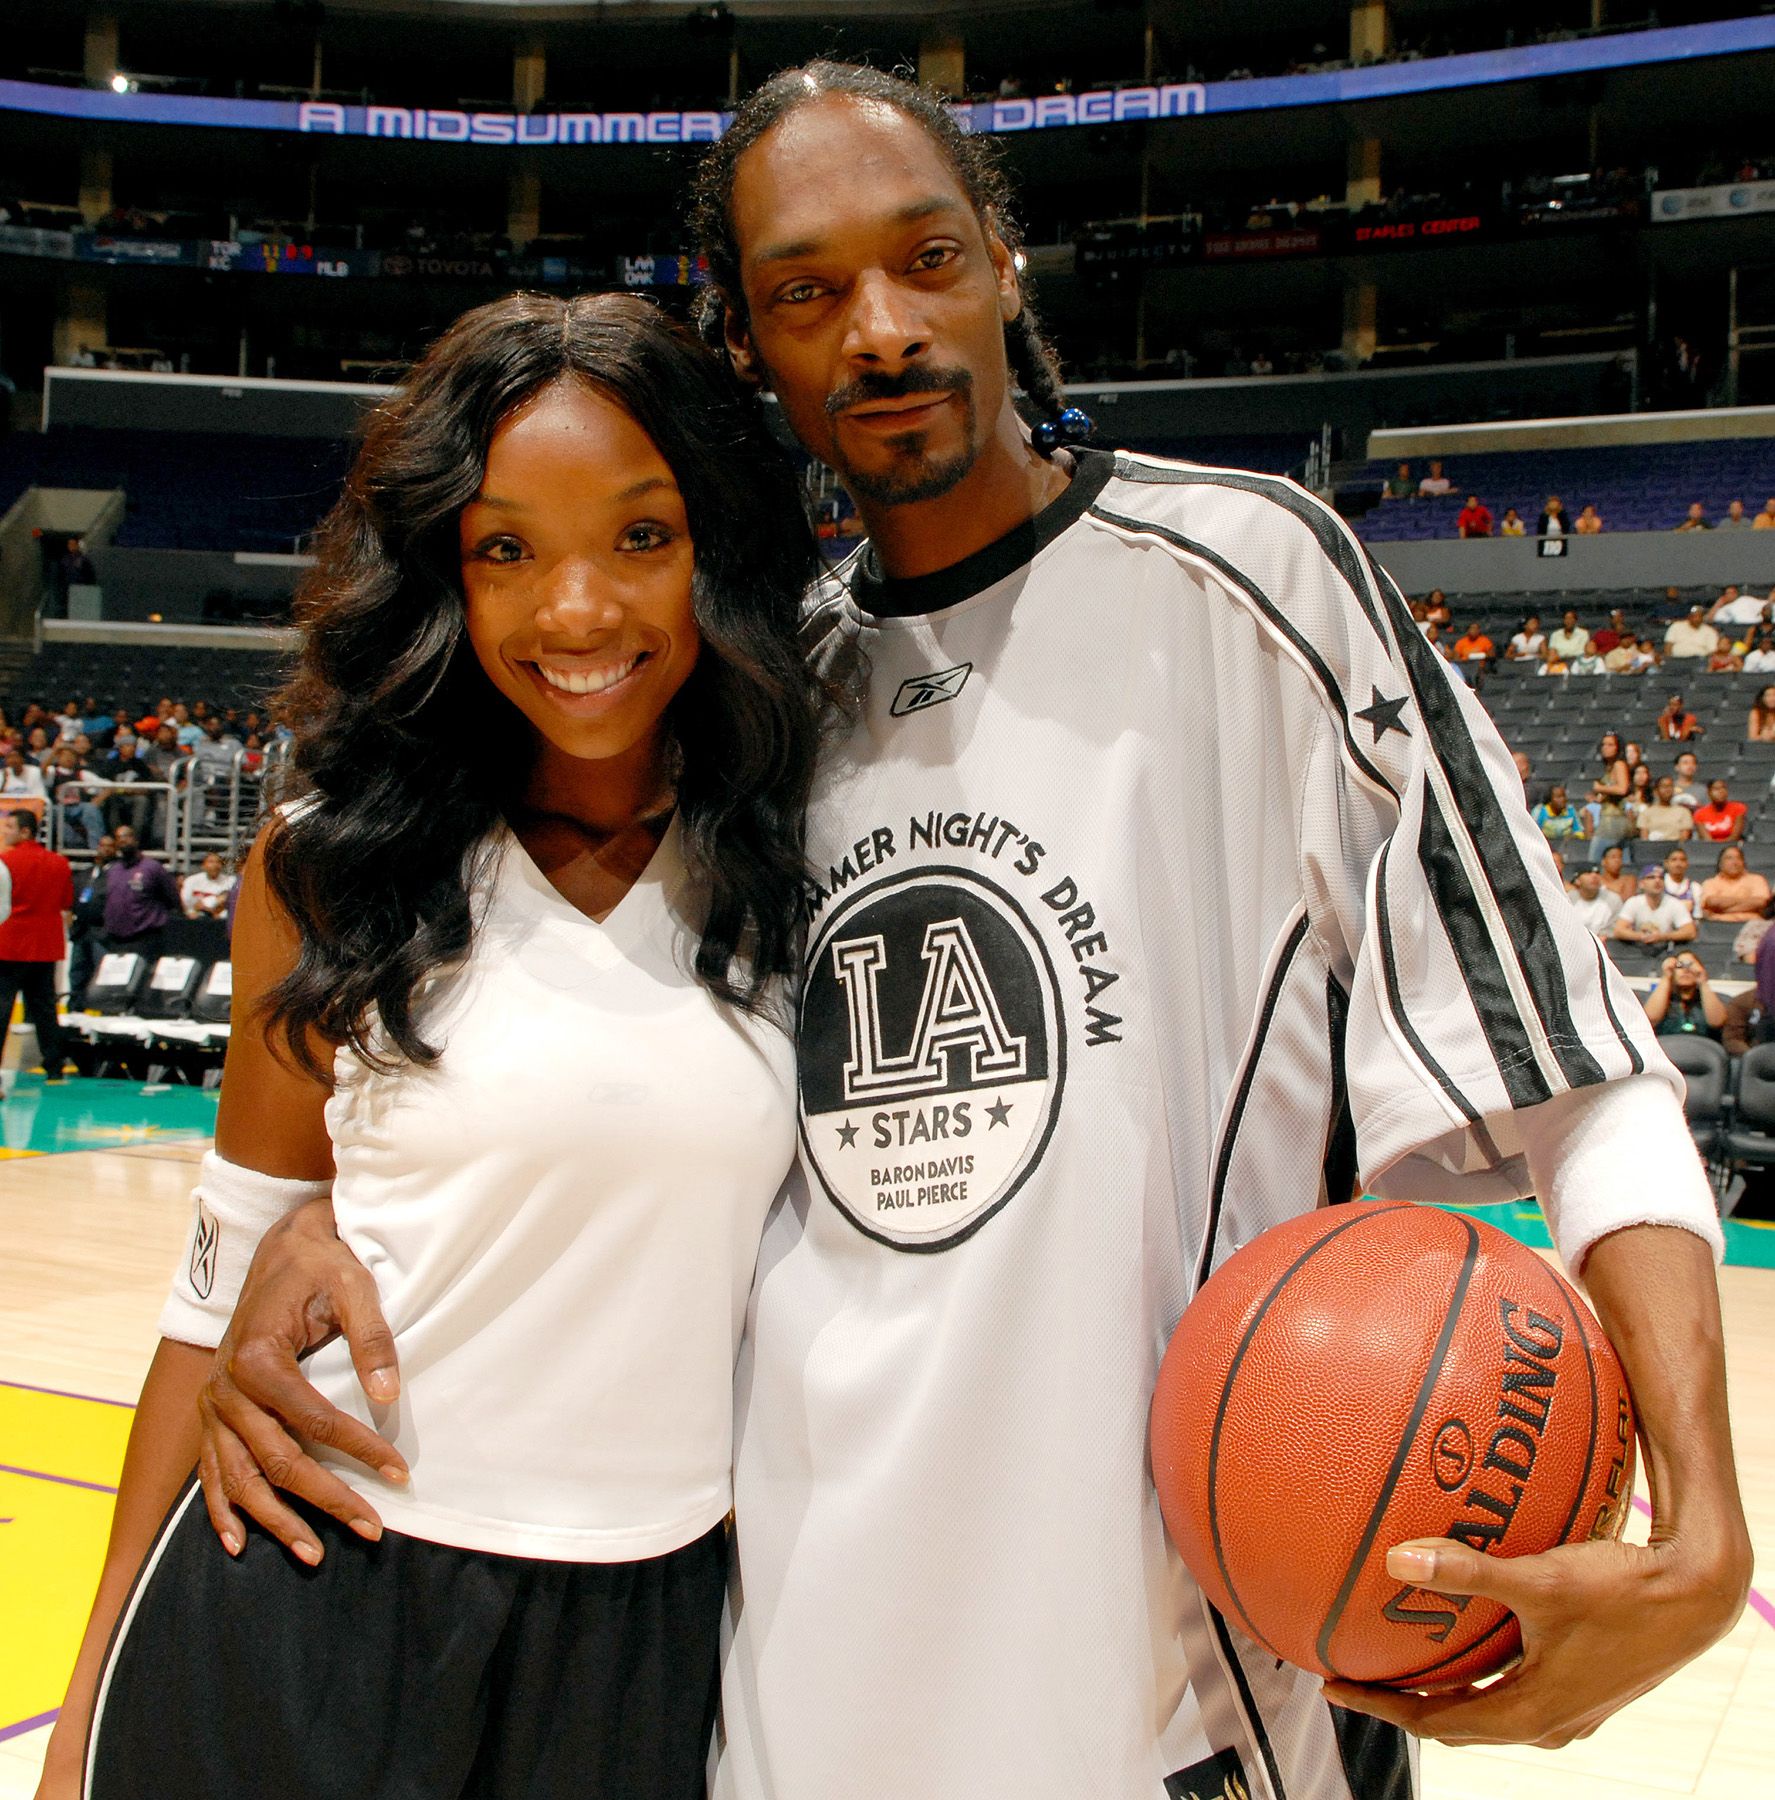 Brandy and Snoop Dogg pose before A Midsummer Night's Dream Celebrity and All-Star Basketball Game on July 9, 2006 at the Staples Center in Los Angeles, Calif. (Photo by M. Caulfield/WireImage)